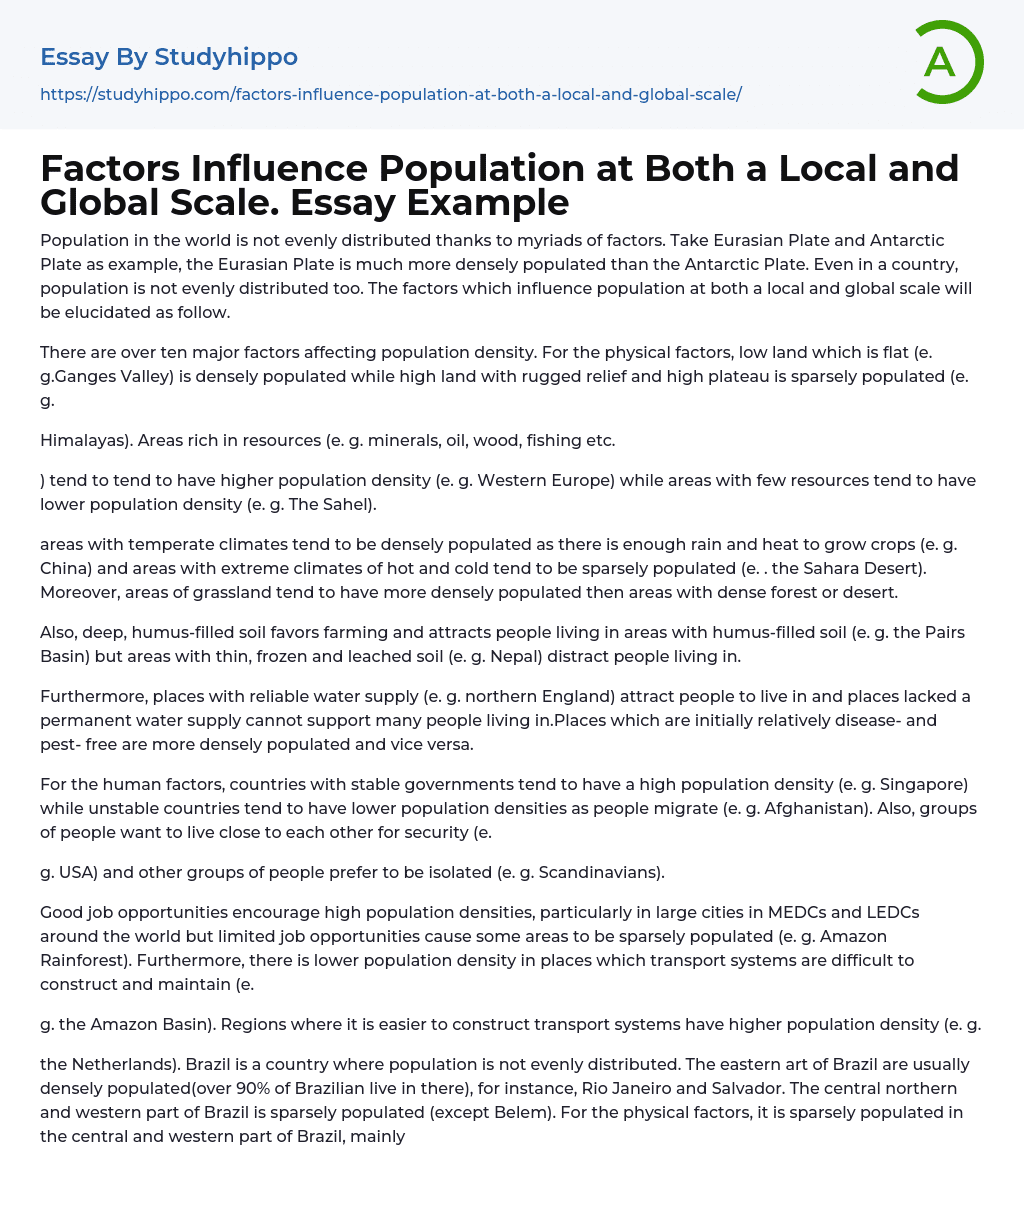 Factors Influence Population at Both a Local and Global Scale. Essay Example